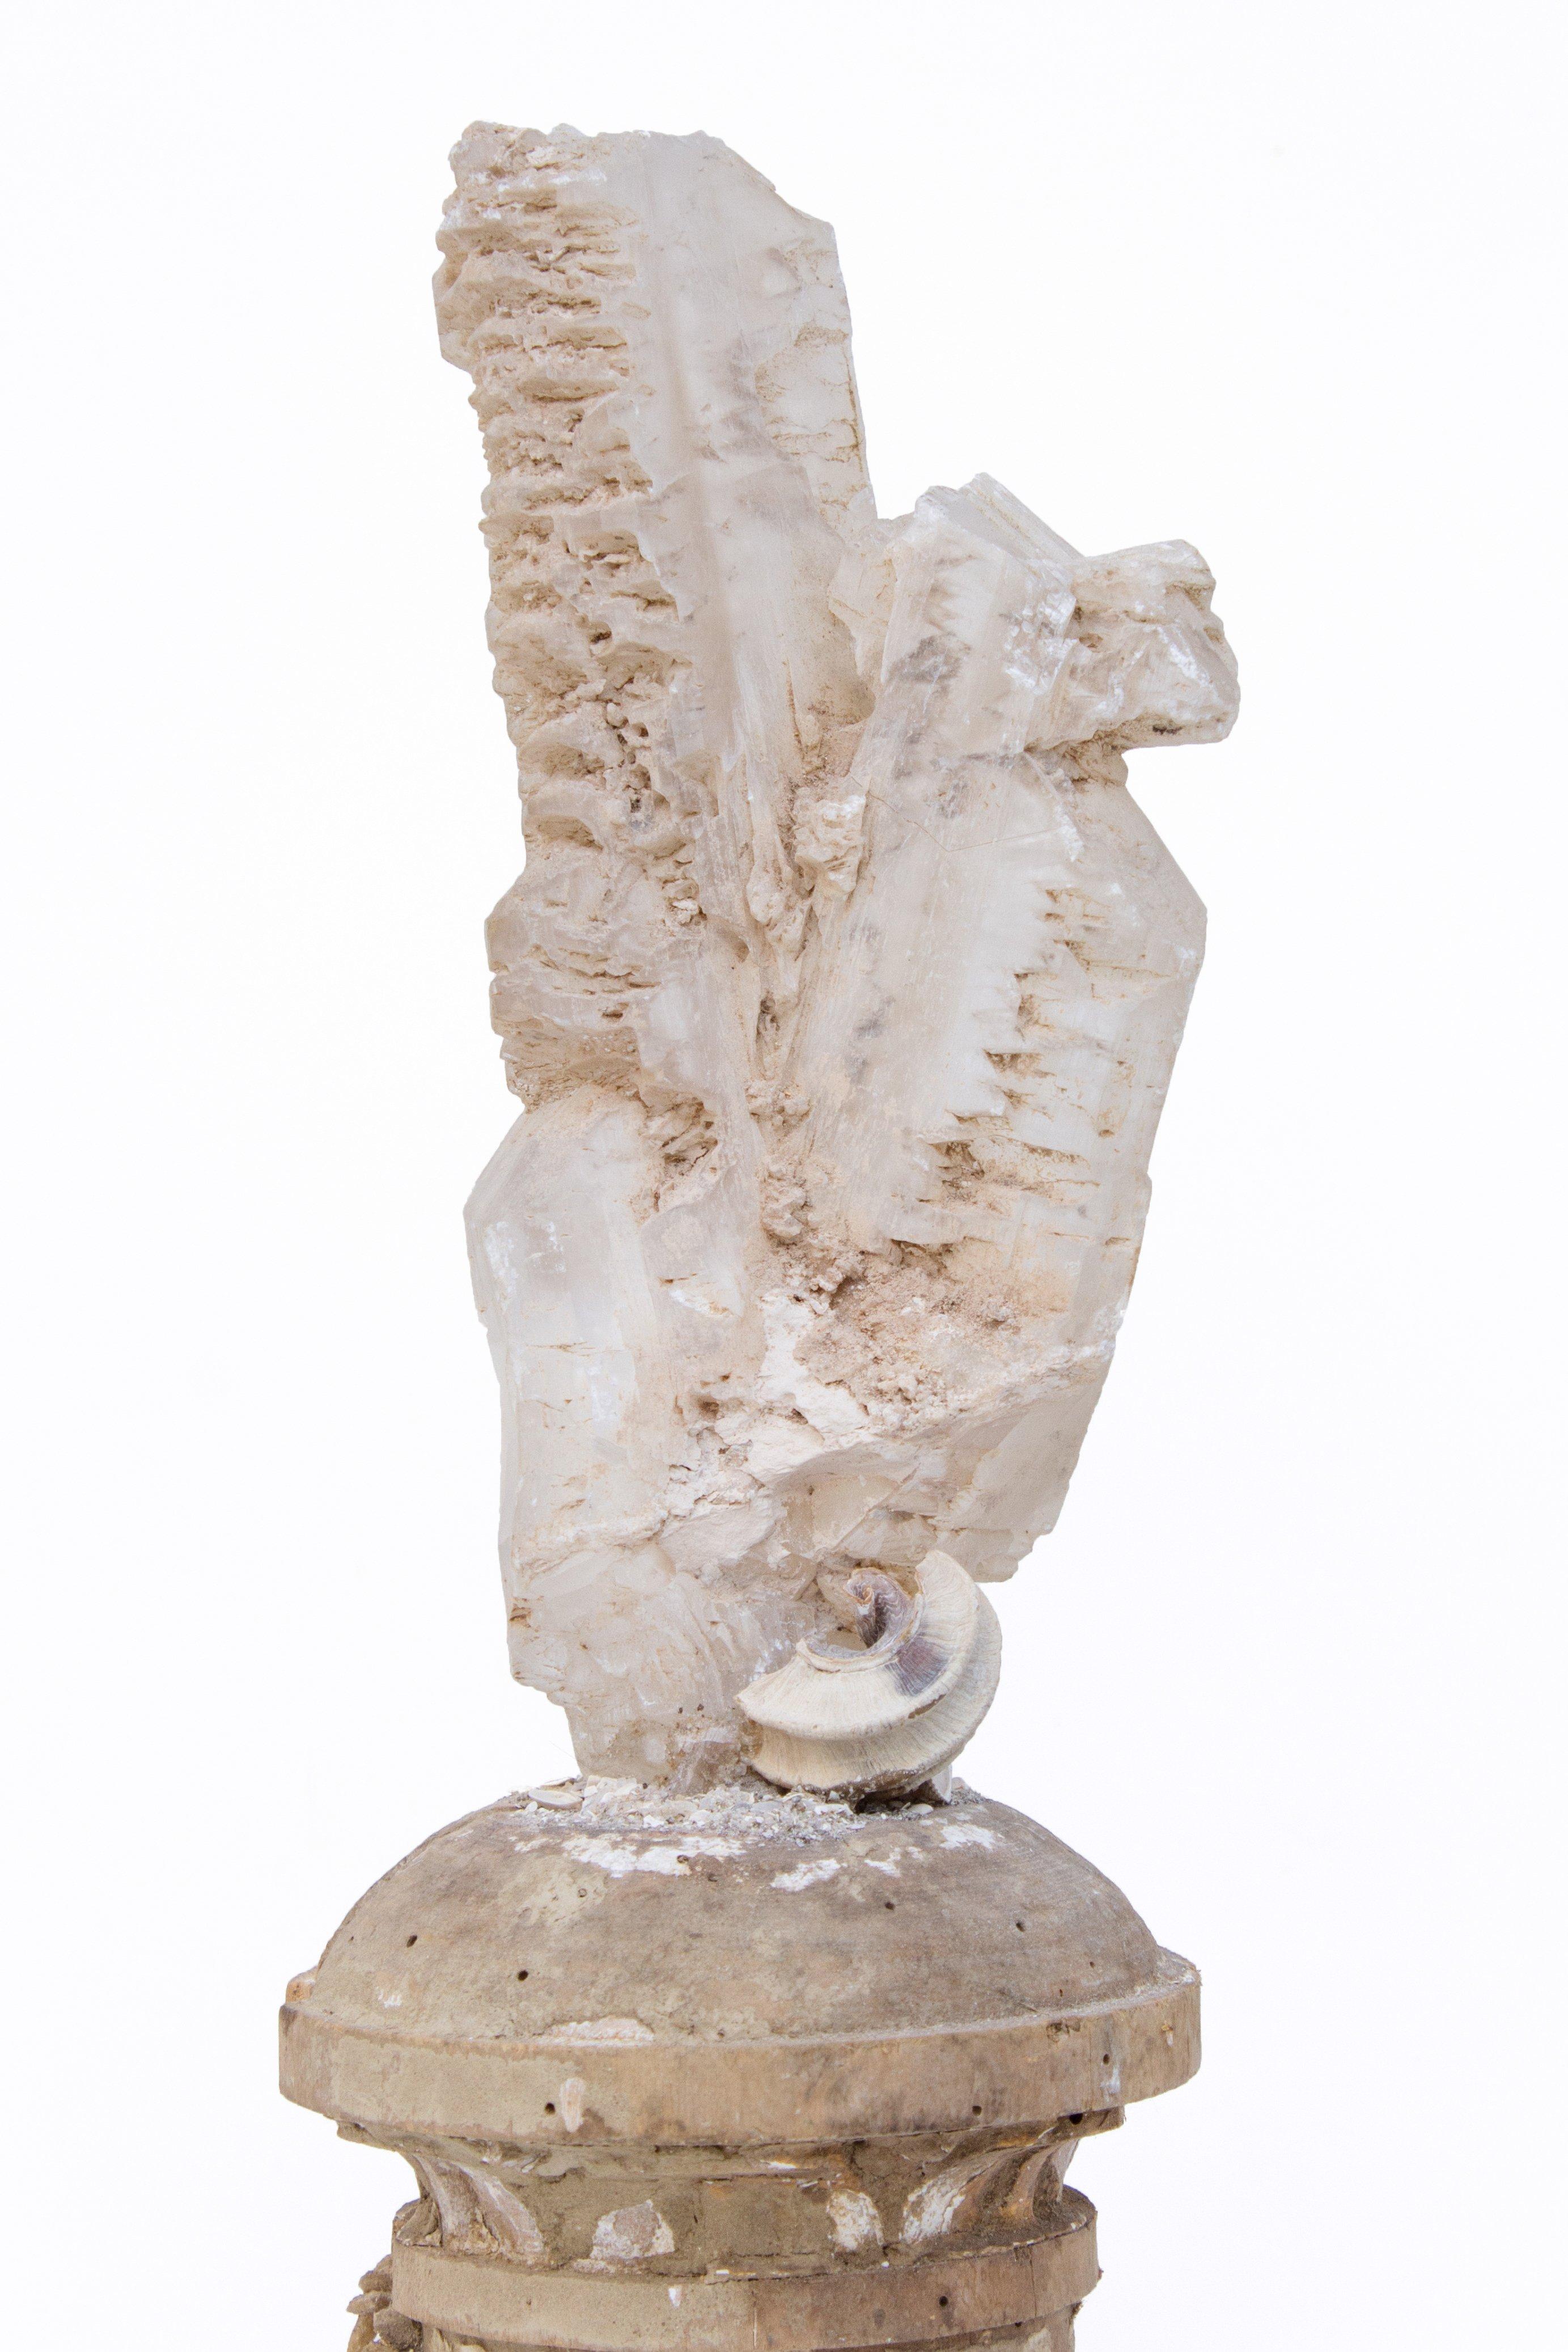 17th century Italian candlestick (Florence) decorated with a selenite blade cluster, fossil shells, and desert rose selenite. This fragment is from a church in Florence. It was found and saved from the notorious flooding of the Arno River in